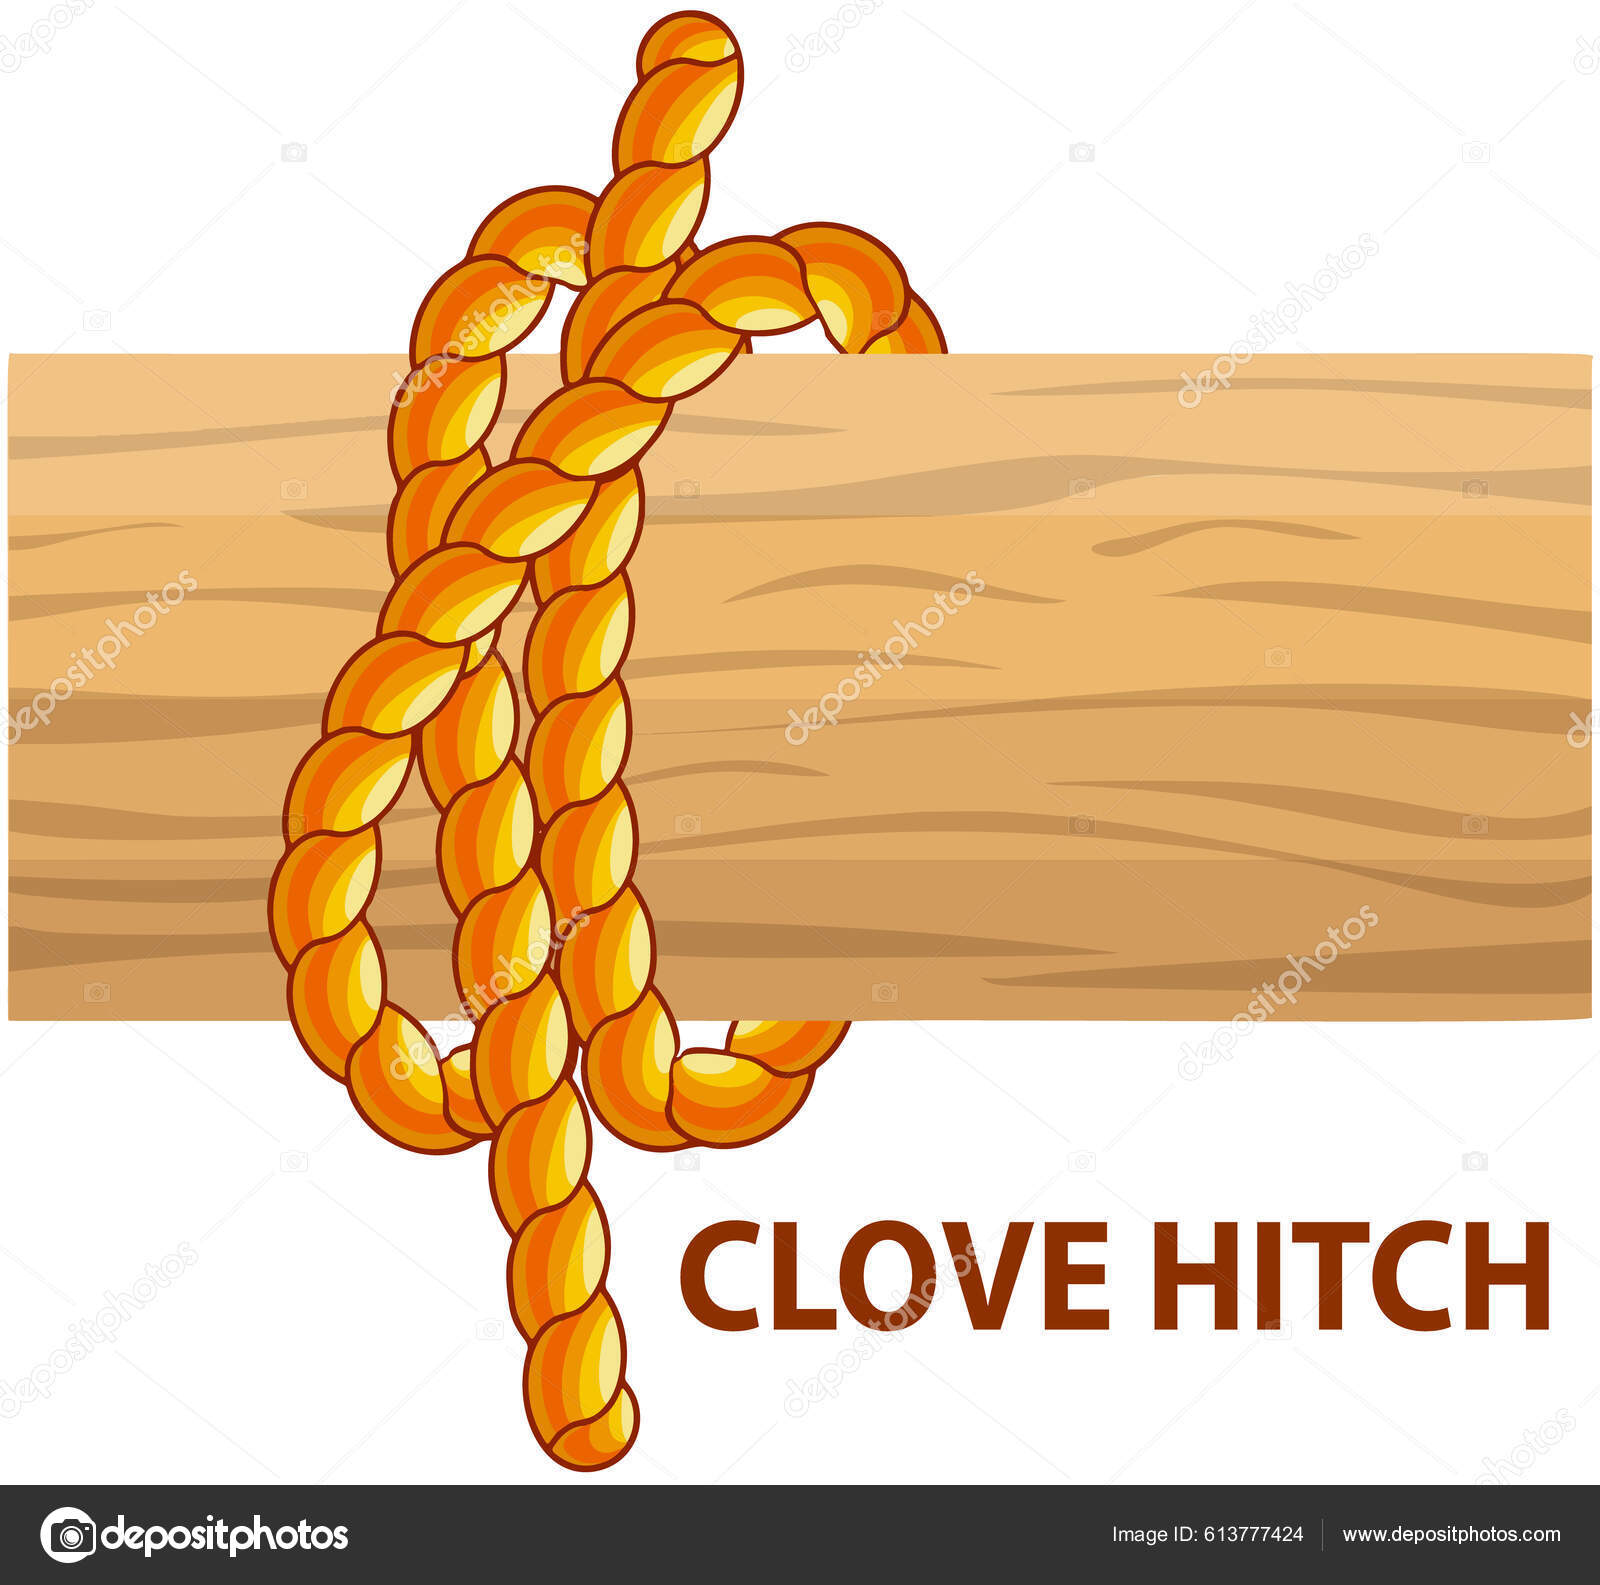 Nautical rope knot. Square knot isolated on white background. Stock Photo